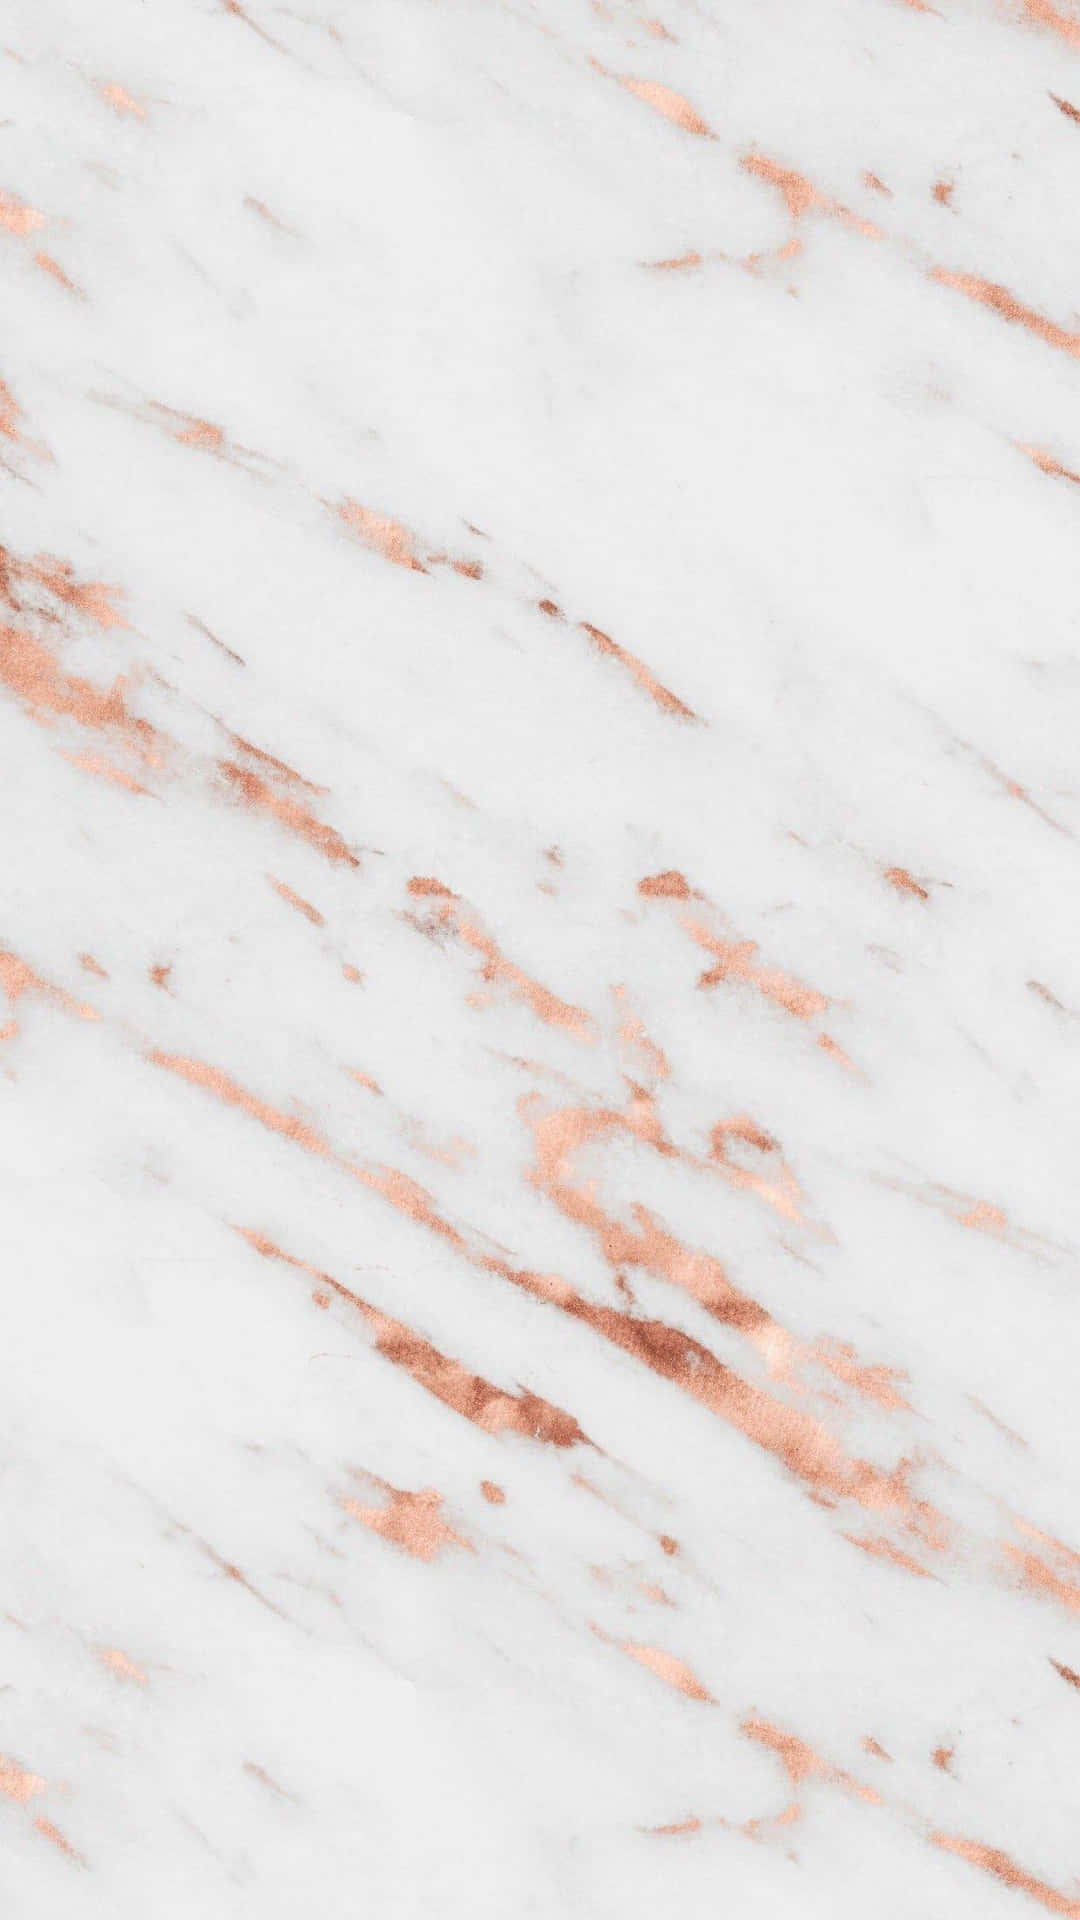 A luxurious pink marble background perfect for any modern aesthetic.